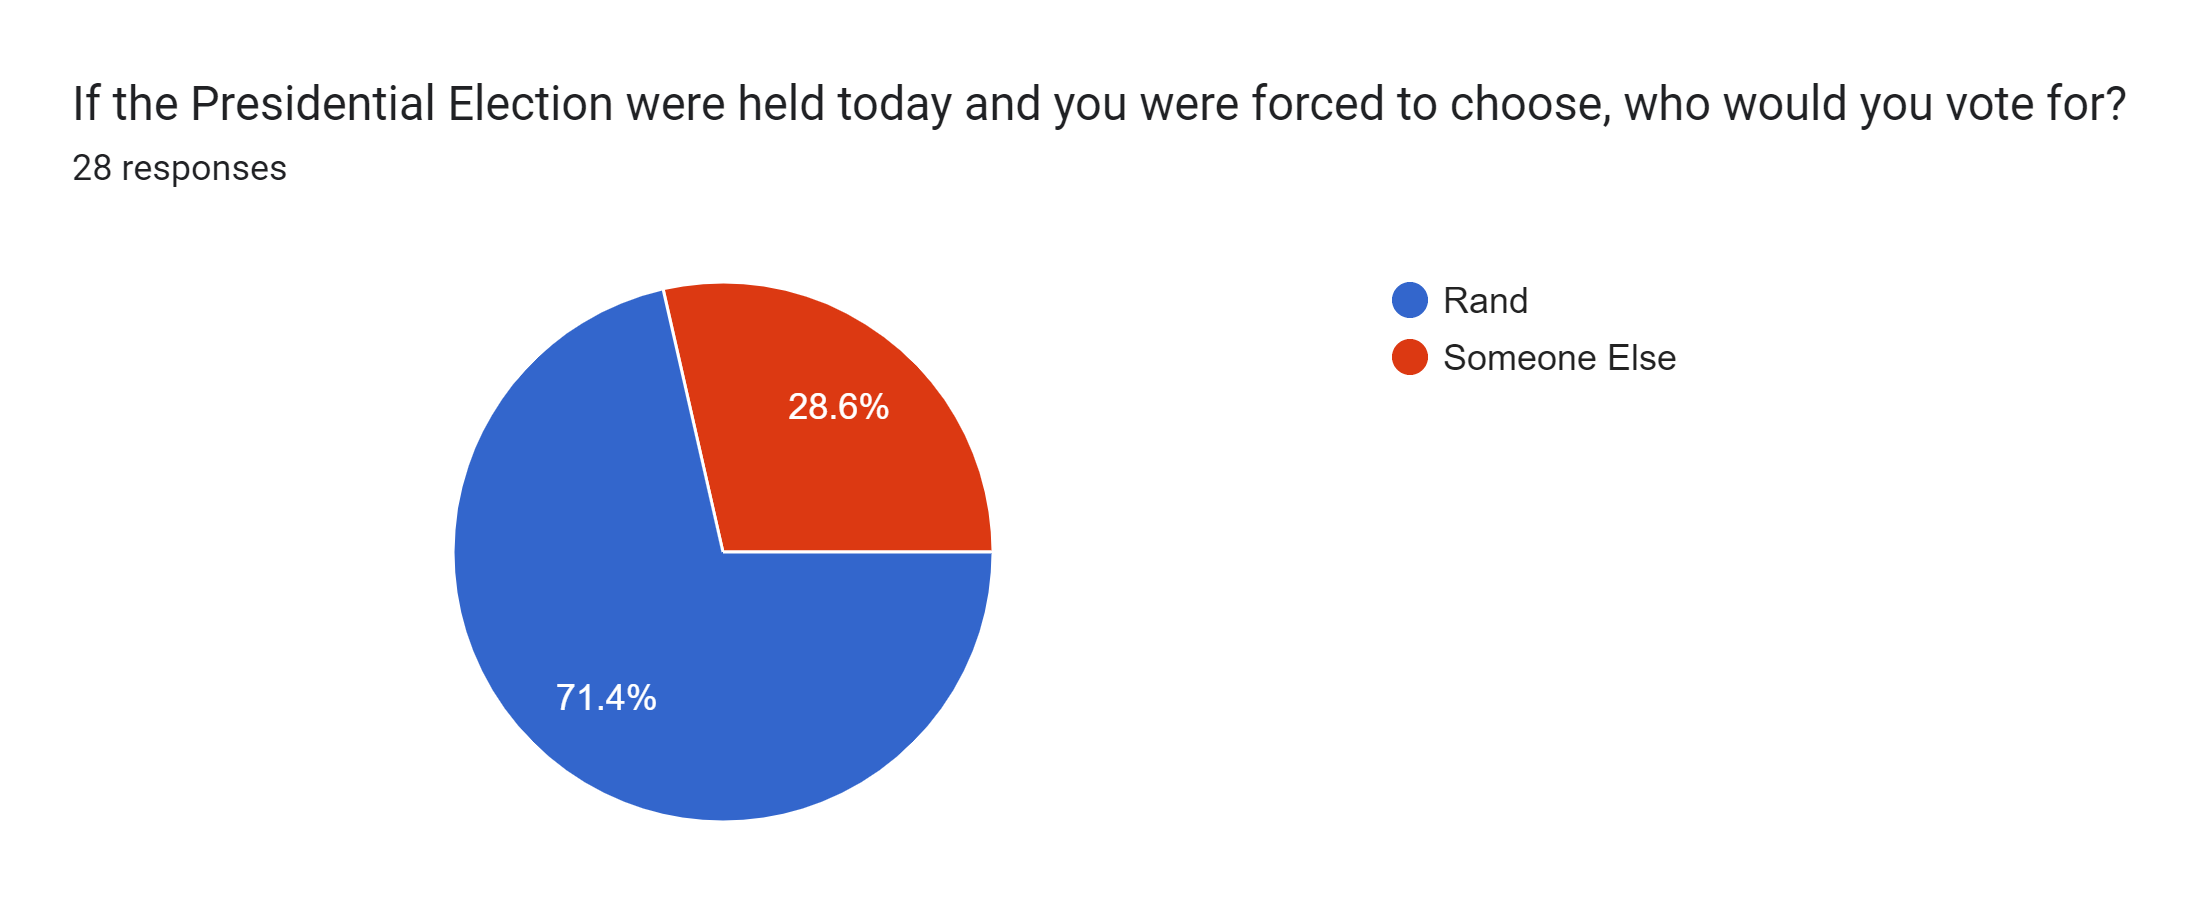 Forms response chart. Question title: If the Presidential Election were held today and you were forced to choose, who would you vote for?. Number of responses: 28 responses.